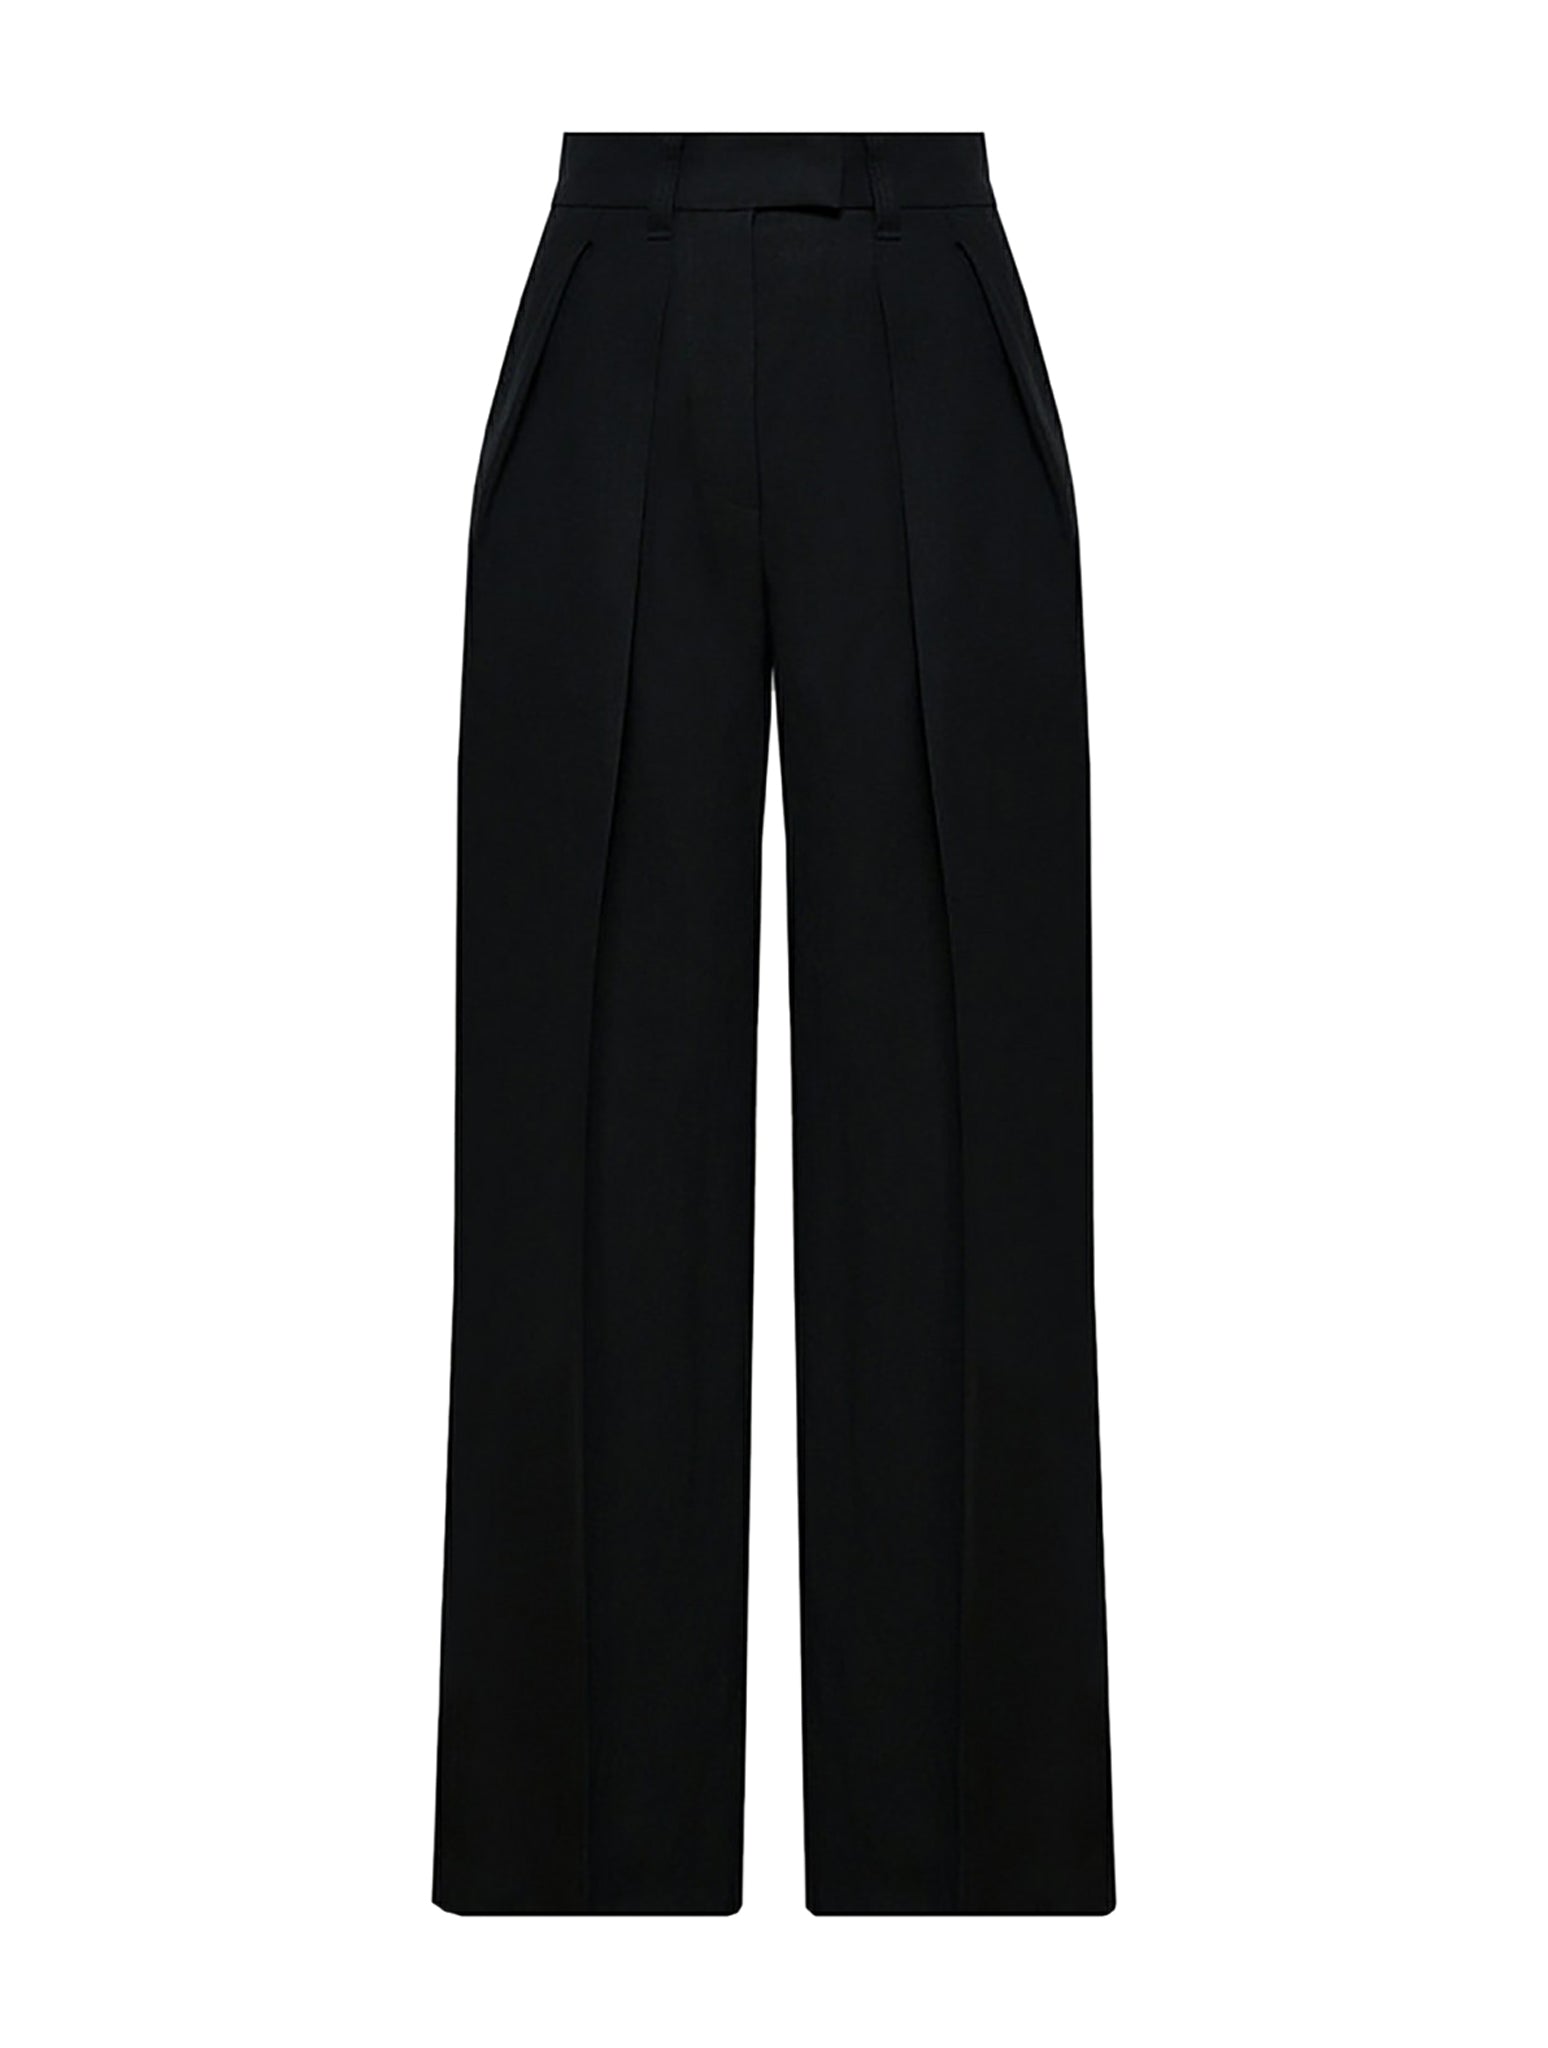 WIDE TAILORED TROUSERS